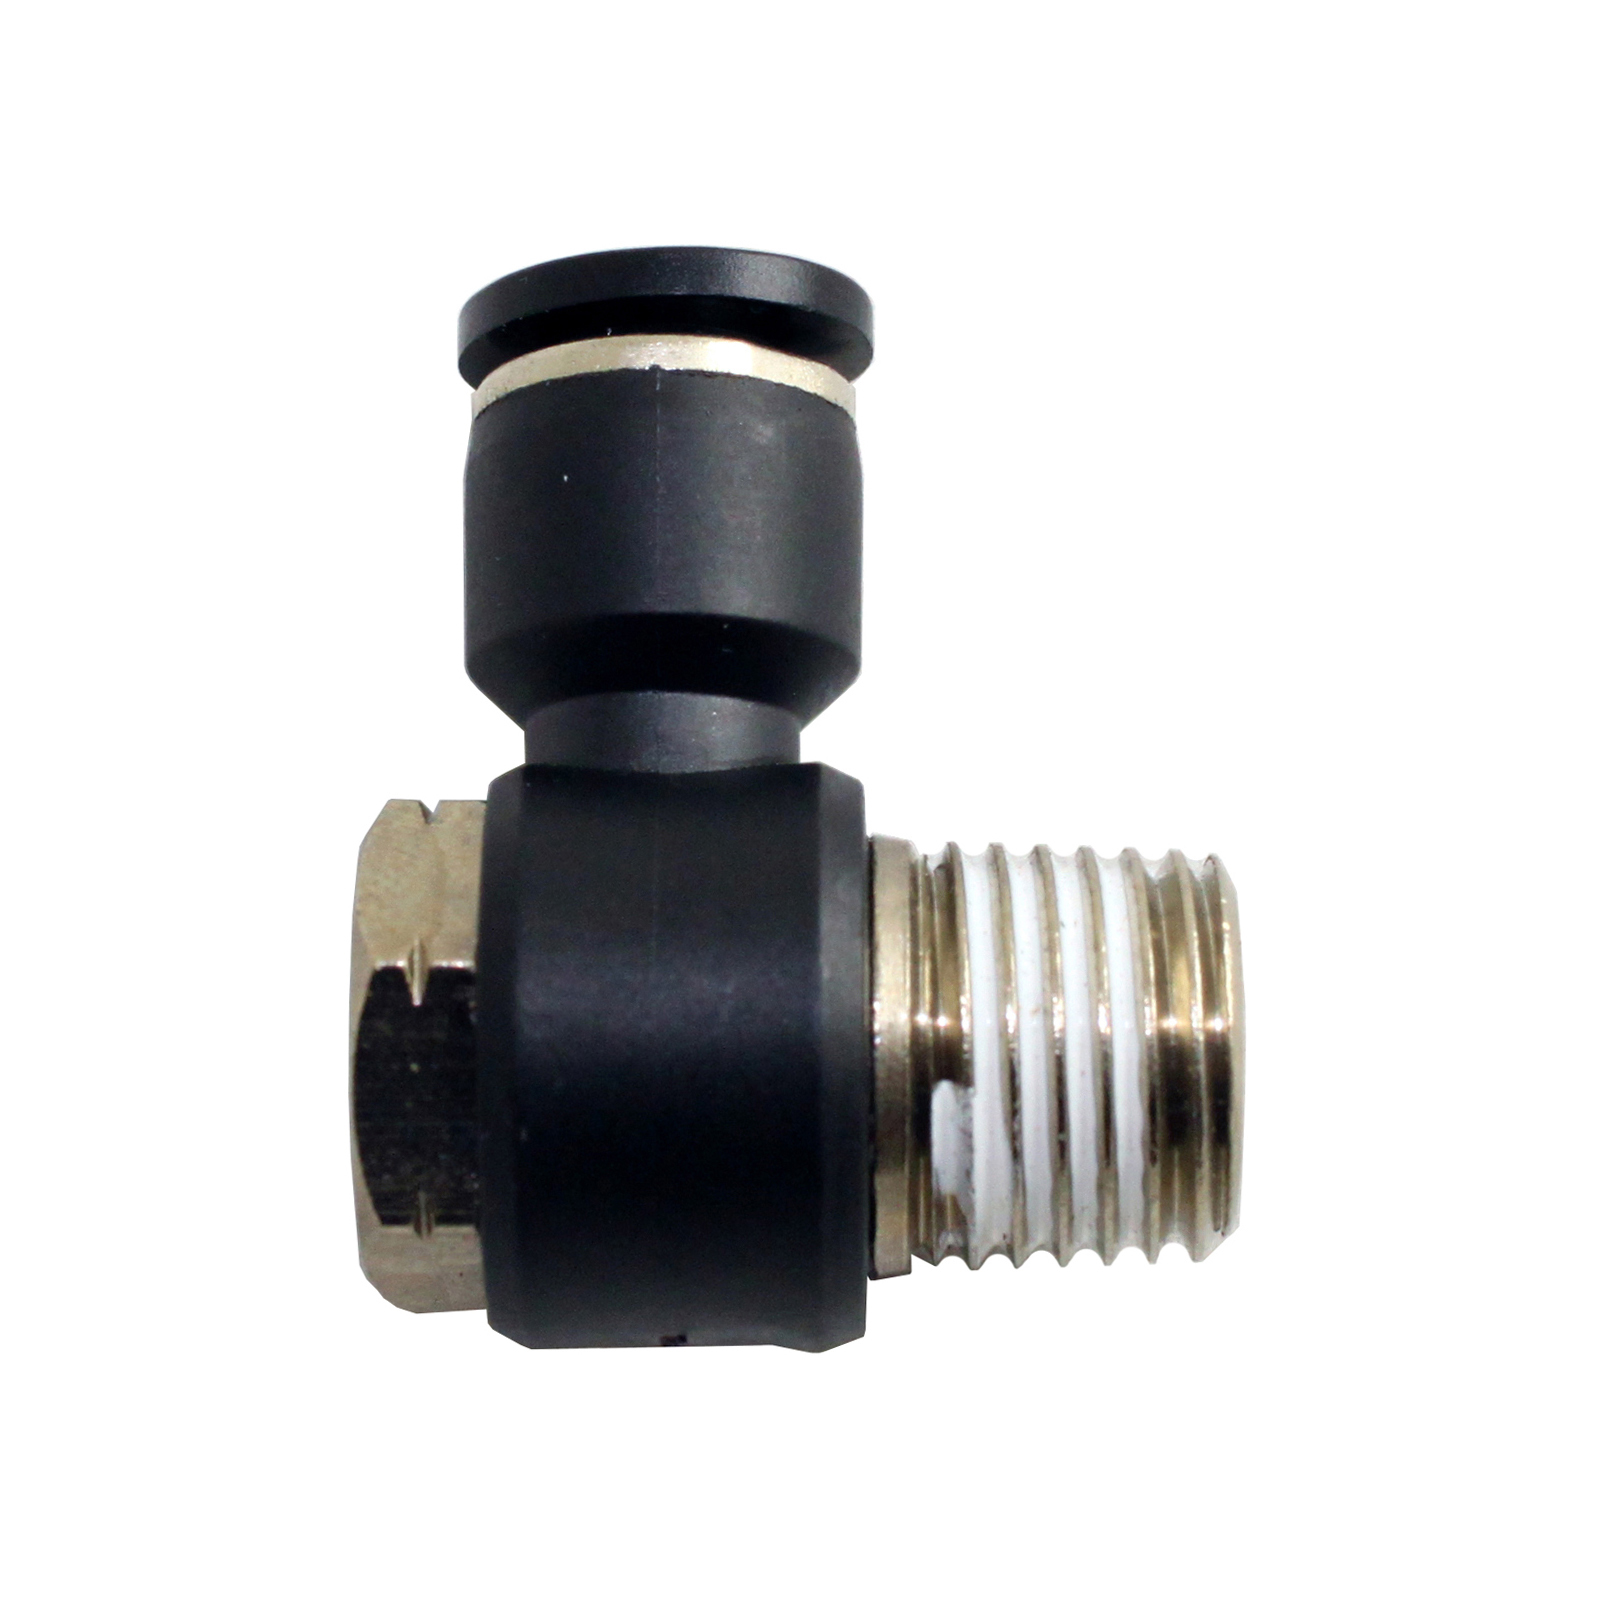 1/2" OD Tube Plug Connector Pneumatic Push to Connect Fitting